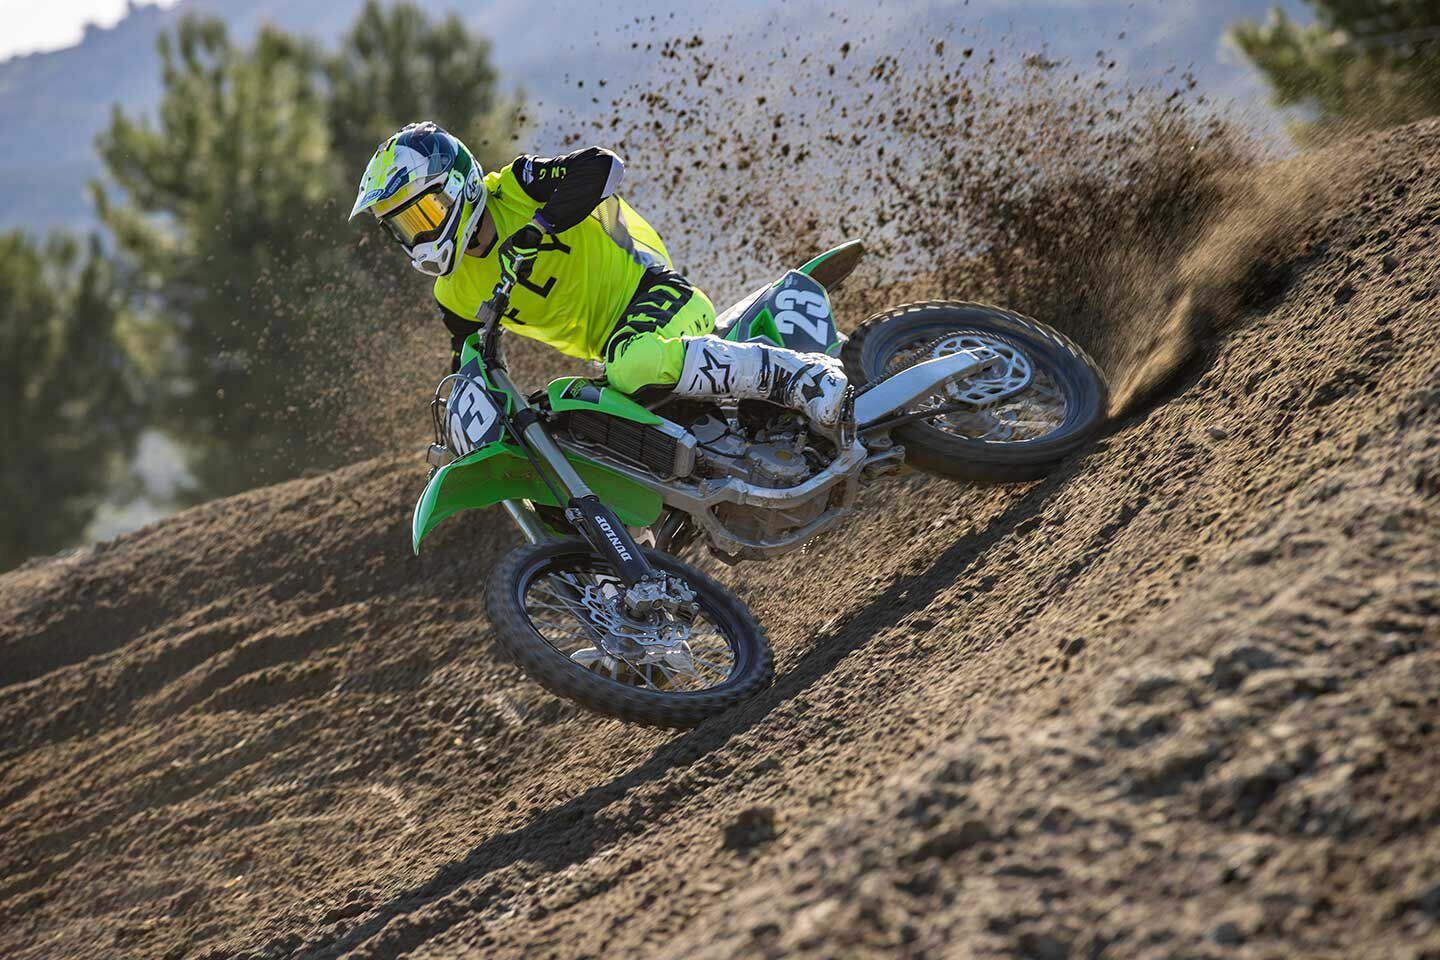 “The KX250 is a little harder to get into the powerband than the other bikes.” <i>—Ty Cullins</i>